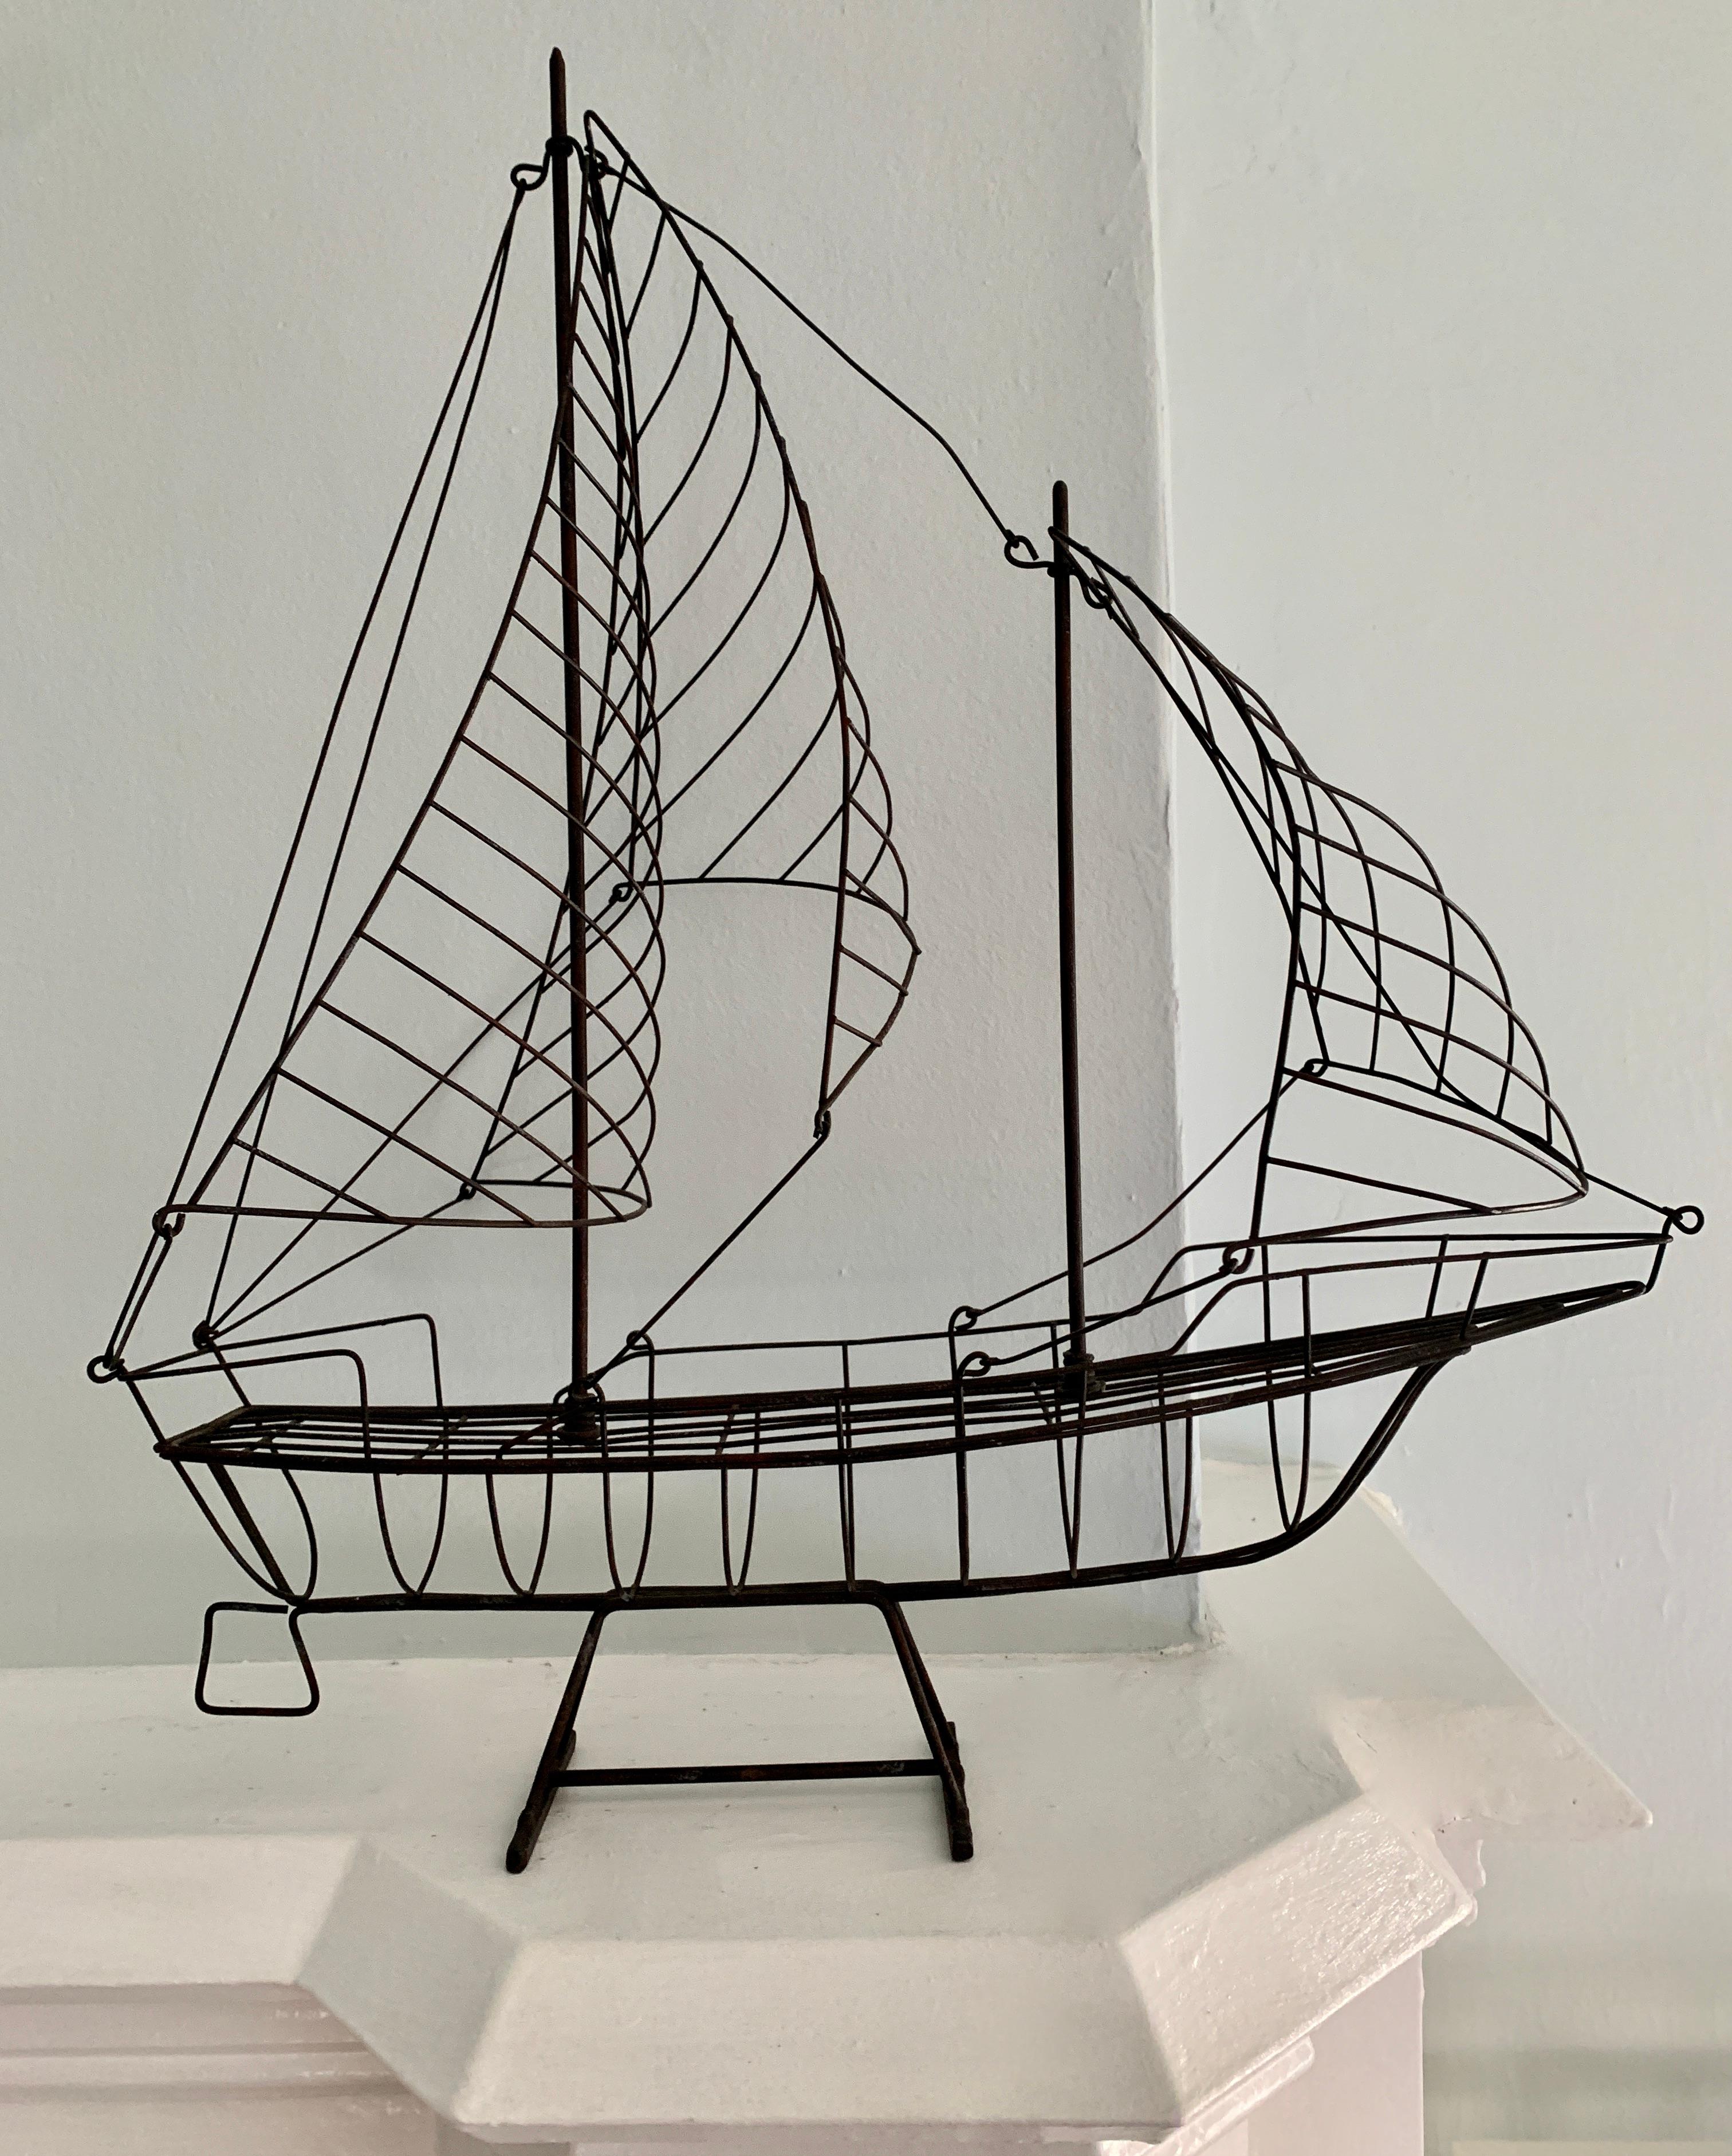 A wonderful sculpture of a ship with large blowing sales, this simple, yet effective sculpture would be perfect on any shelf, especially for the lover of the sea or seaside home.